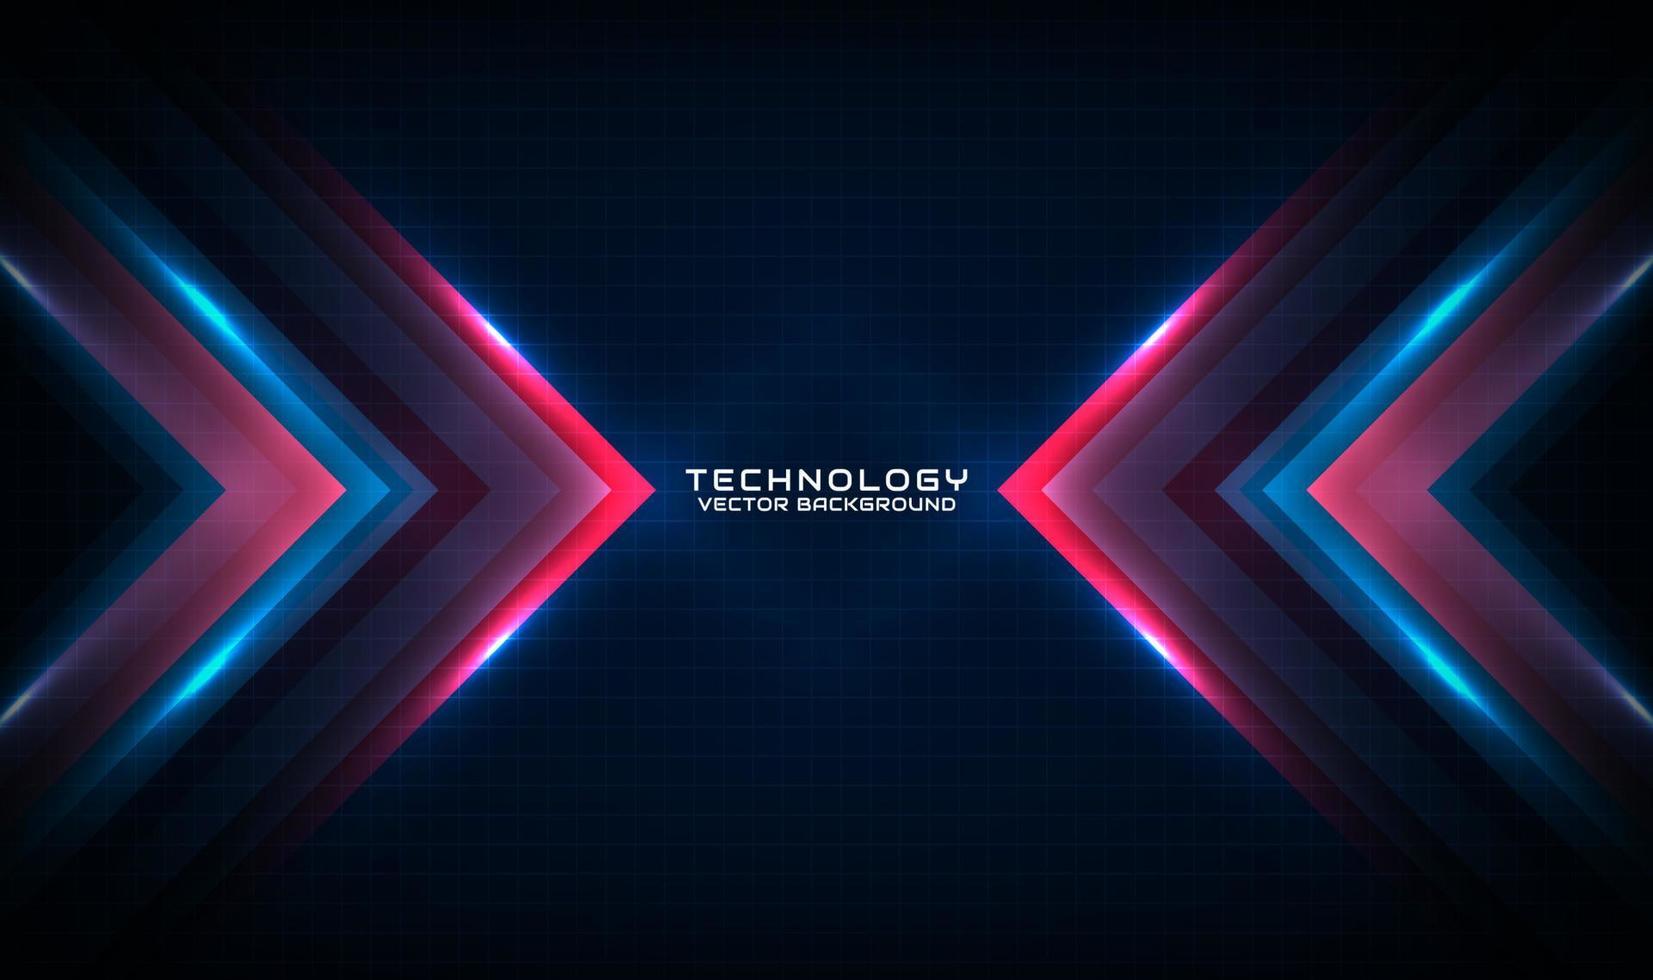 3D blue red techno abstract background overlap layer on dark space with motion blur tech style decoration. Graphic design element speed concept for banner, flyer, card, brochure cover, or landing page vector